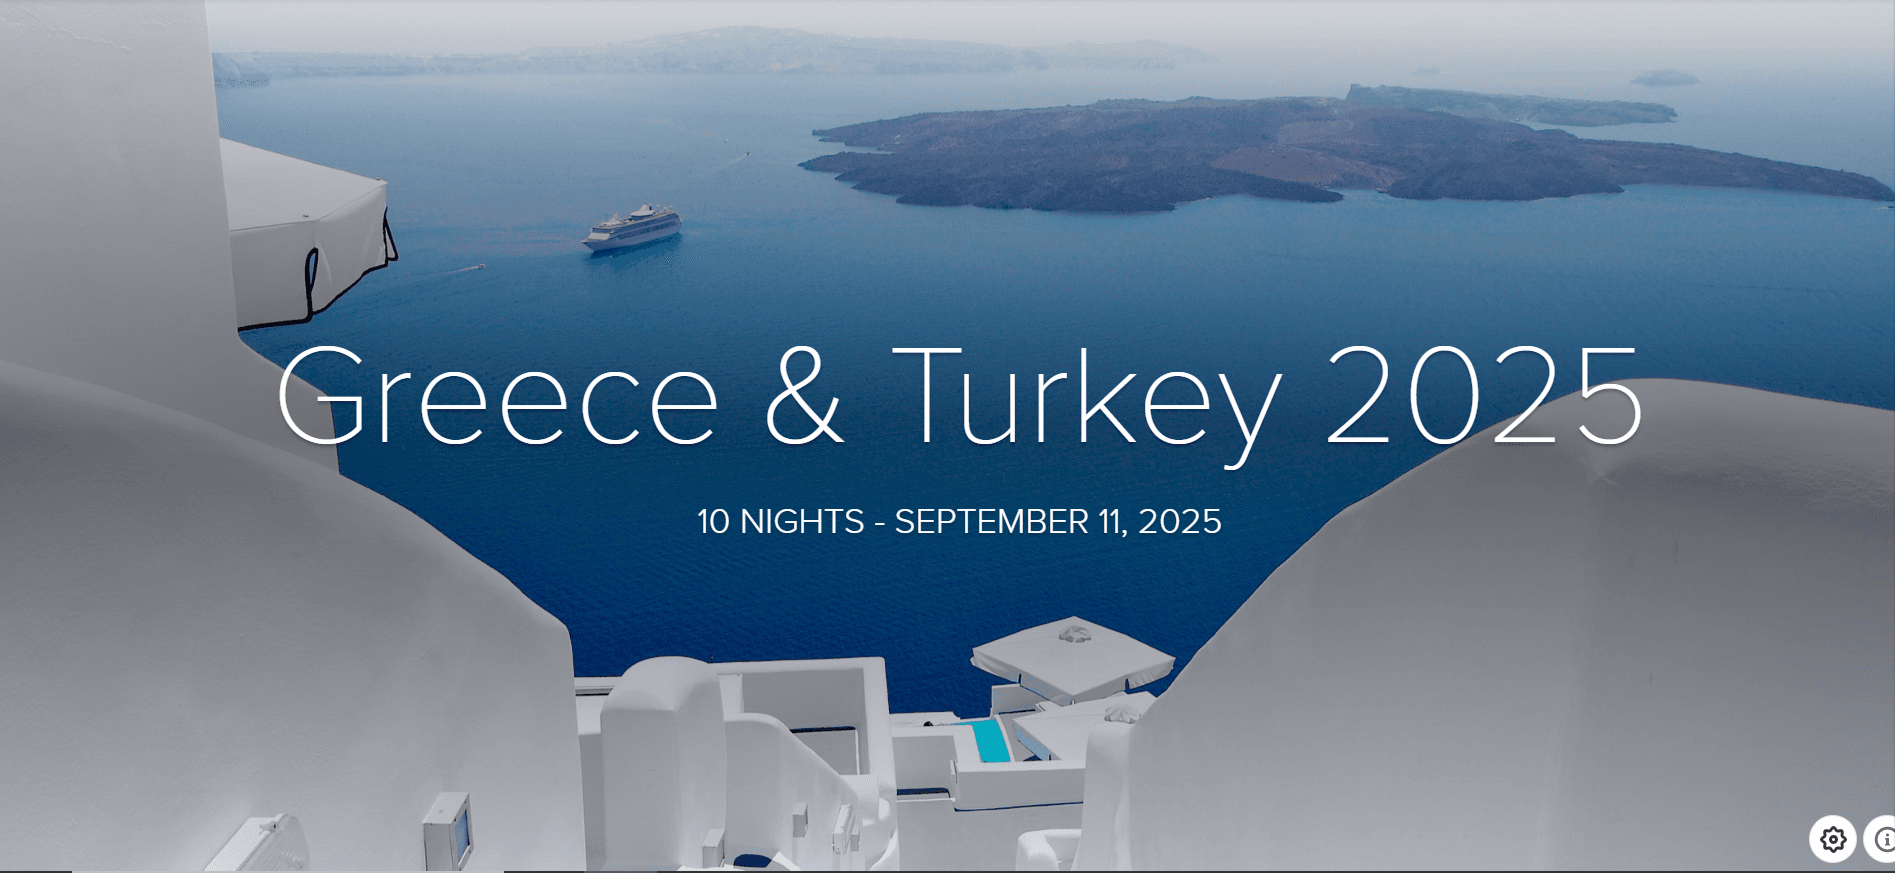 OPA!!! GREECE AND TURKEY IN 2025